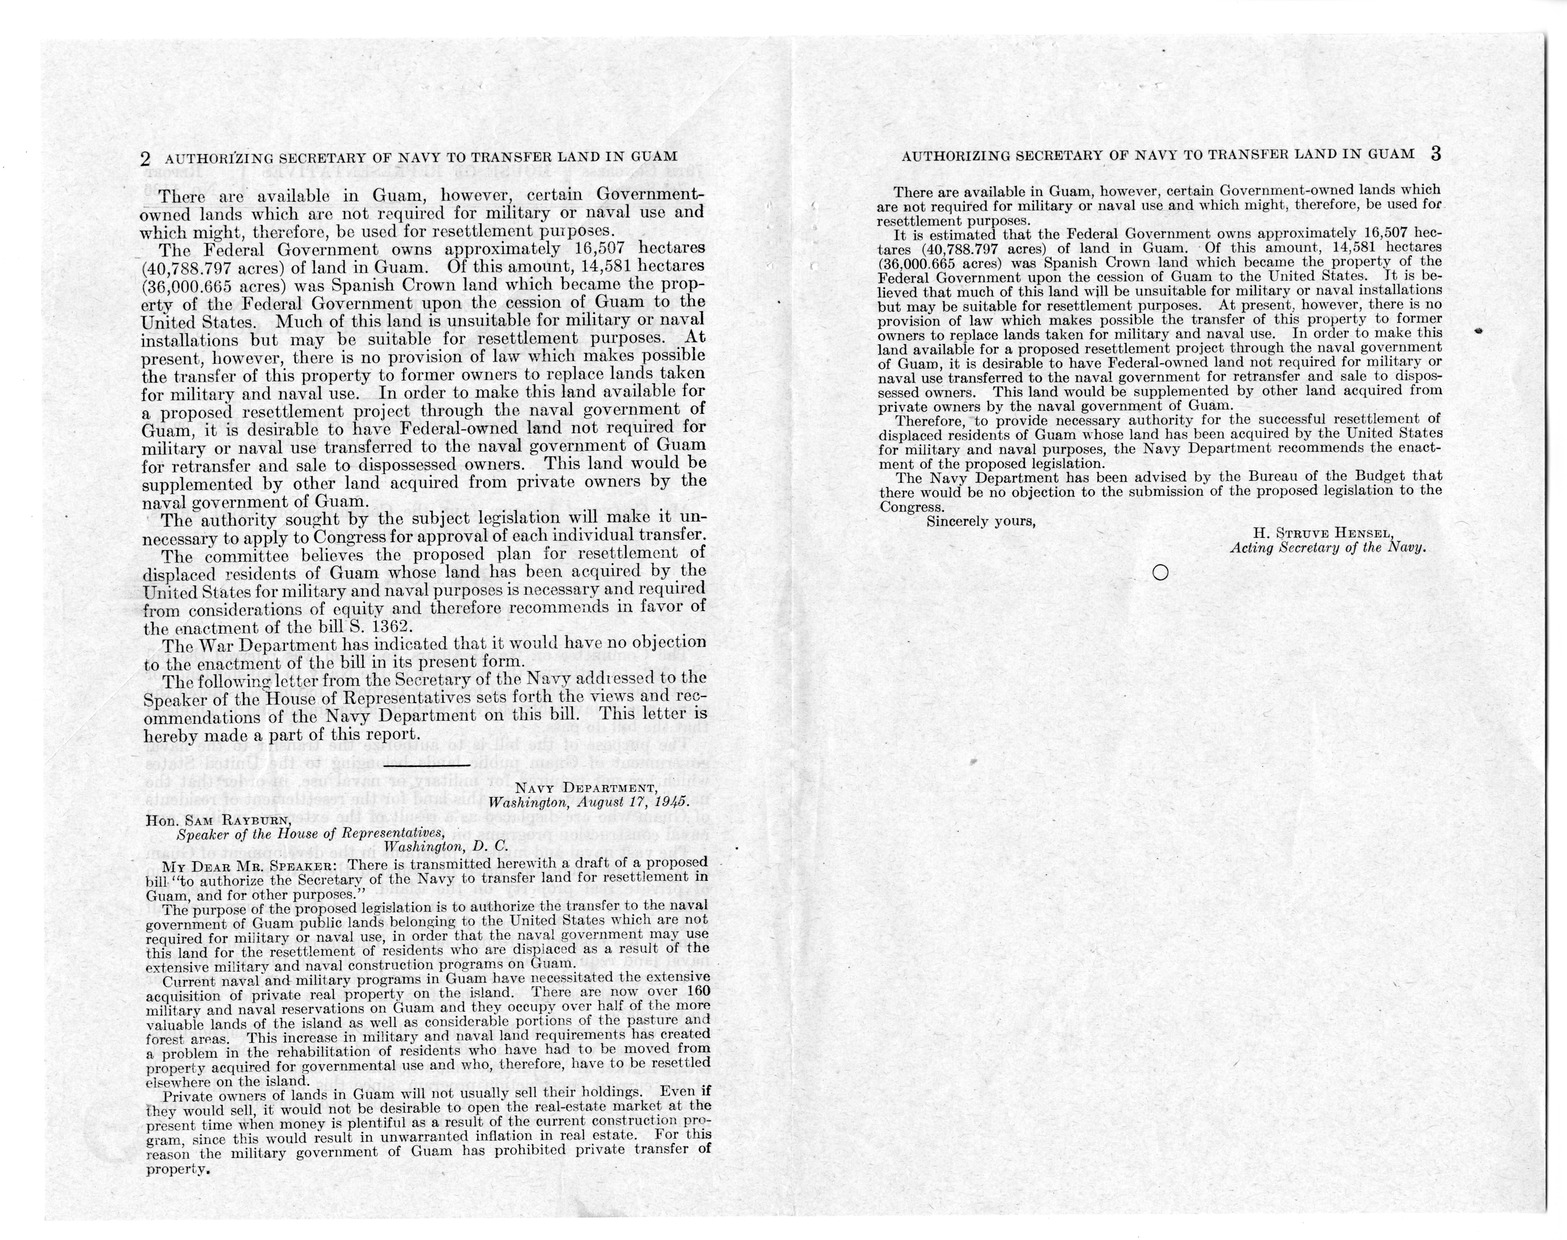 Memorandum from Frederick J. Bailey to M. C. Latta, S. 1362, To Authorize the Secretary of the Navy to Transfer Land for Resettlement in Guam, with Attachments